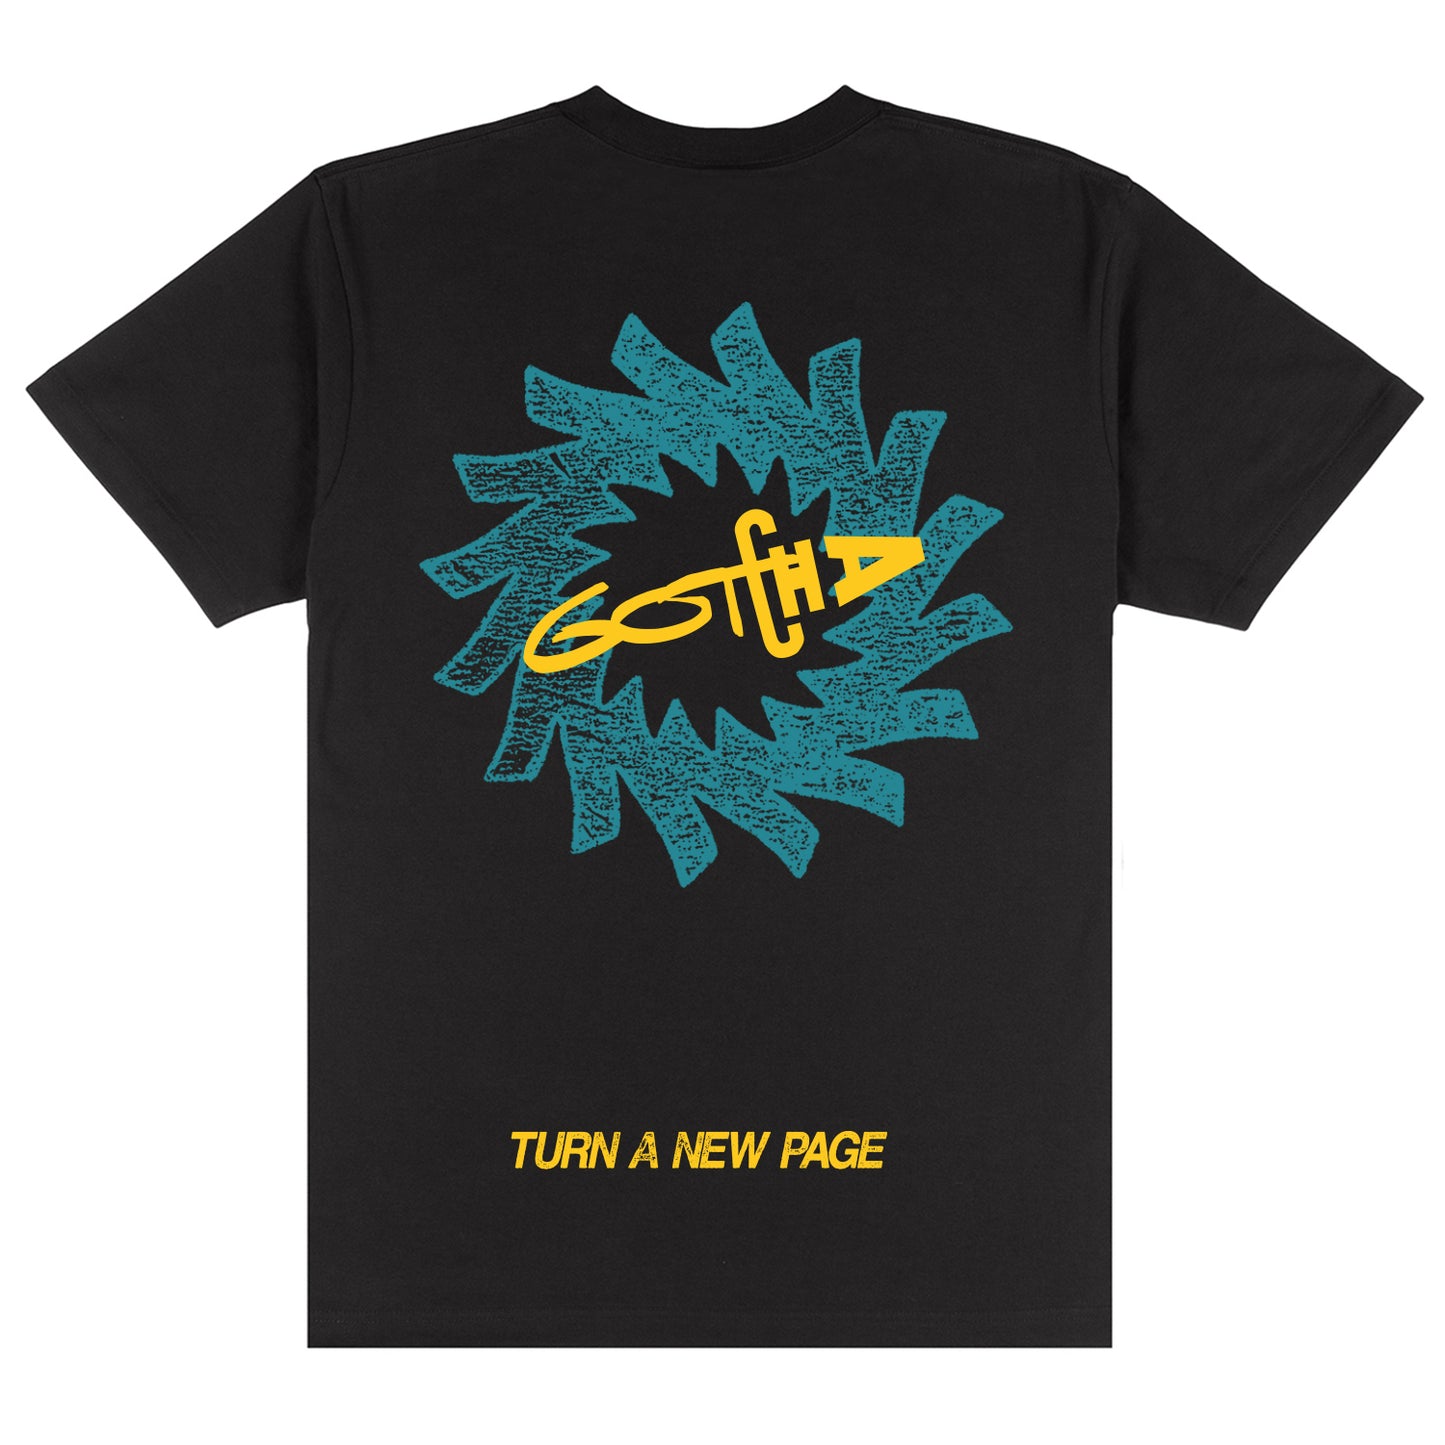 Men's Turn A New Page Graphic Tee